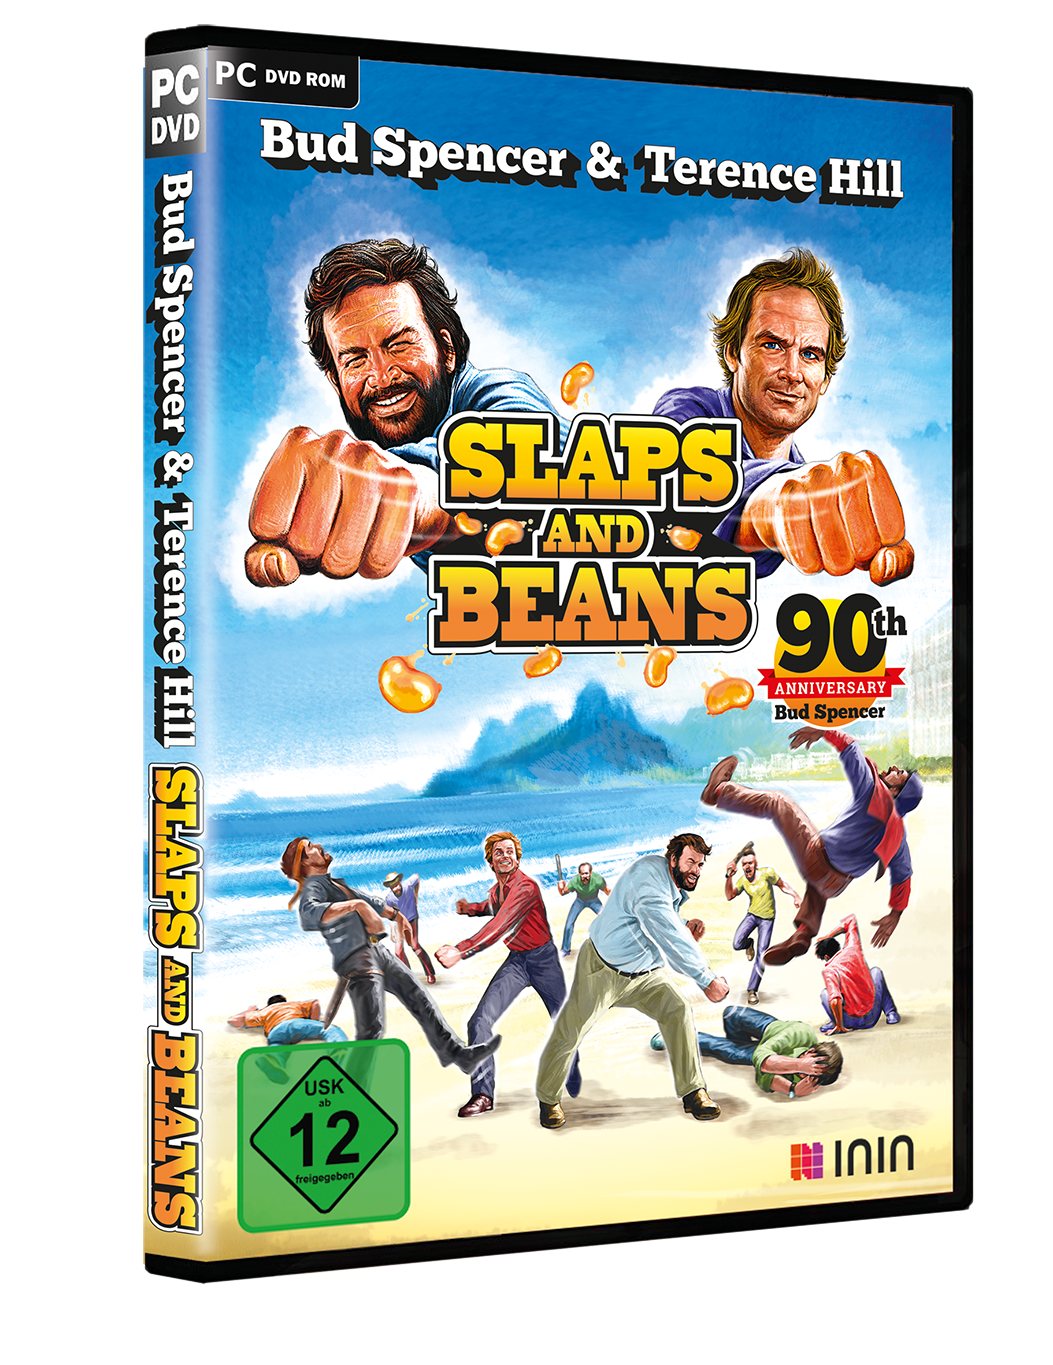 And - Spencer & Terence Hill – Beans [PC] Slaps Edition – Bud Anniversary